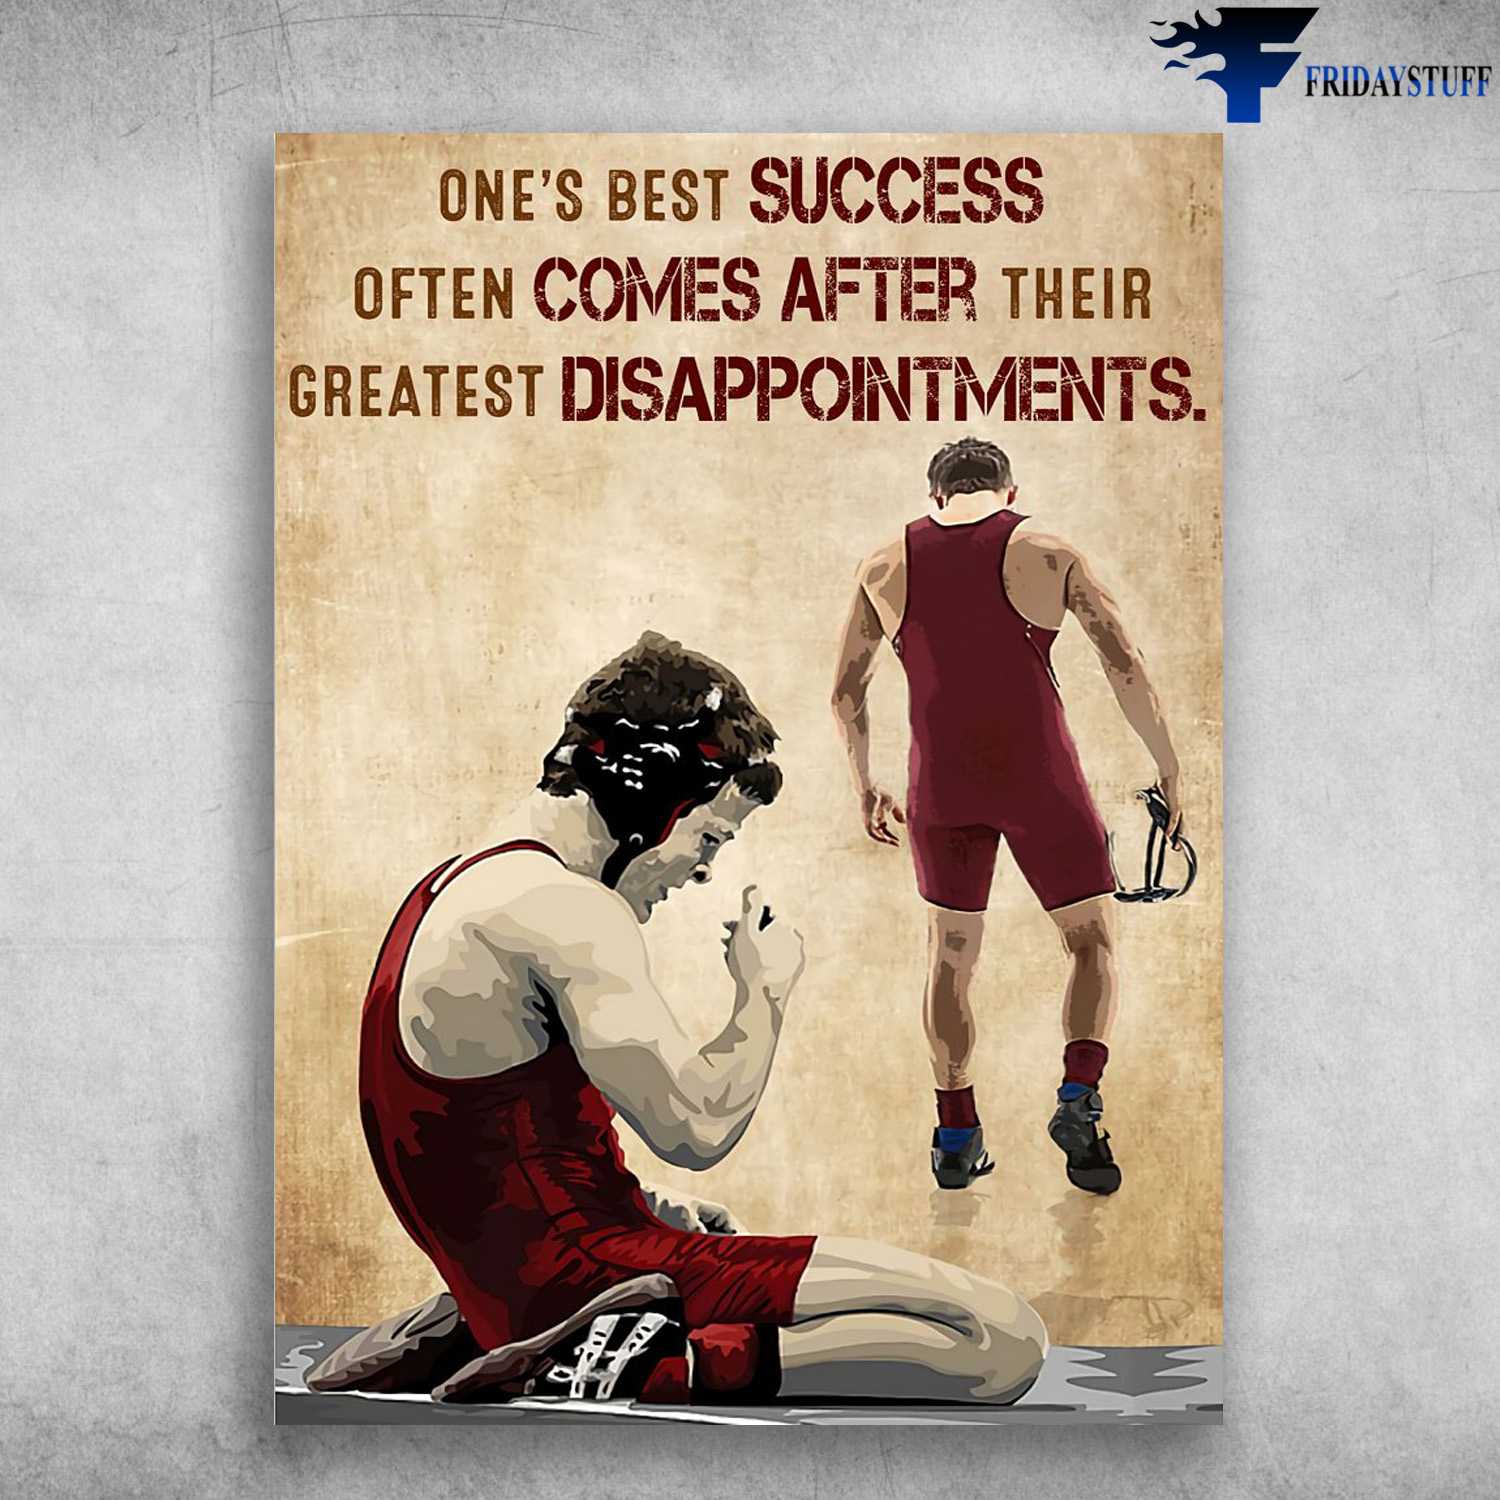 Wrestling Poster, One's Best Success, Often Comes After Their, Greatest Disappointments